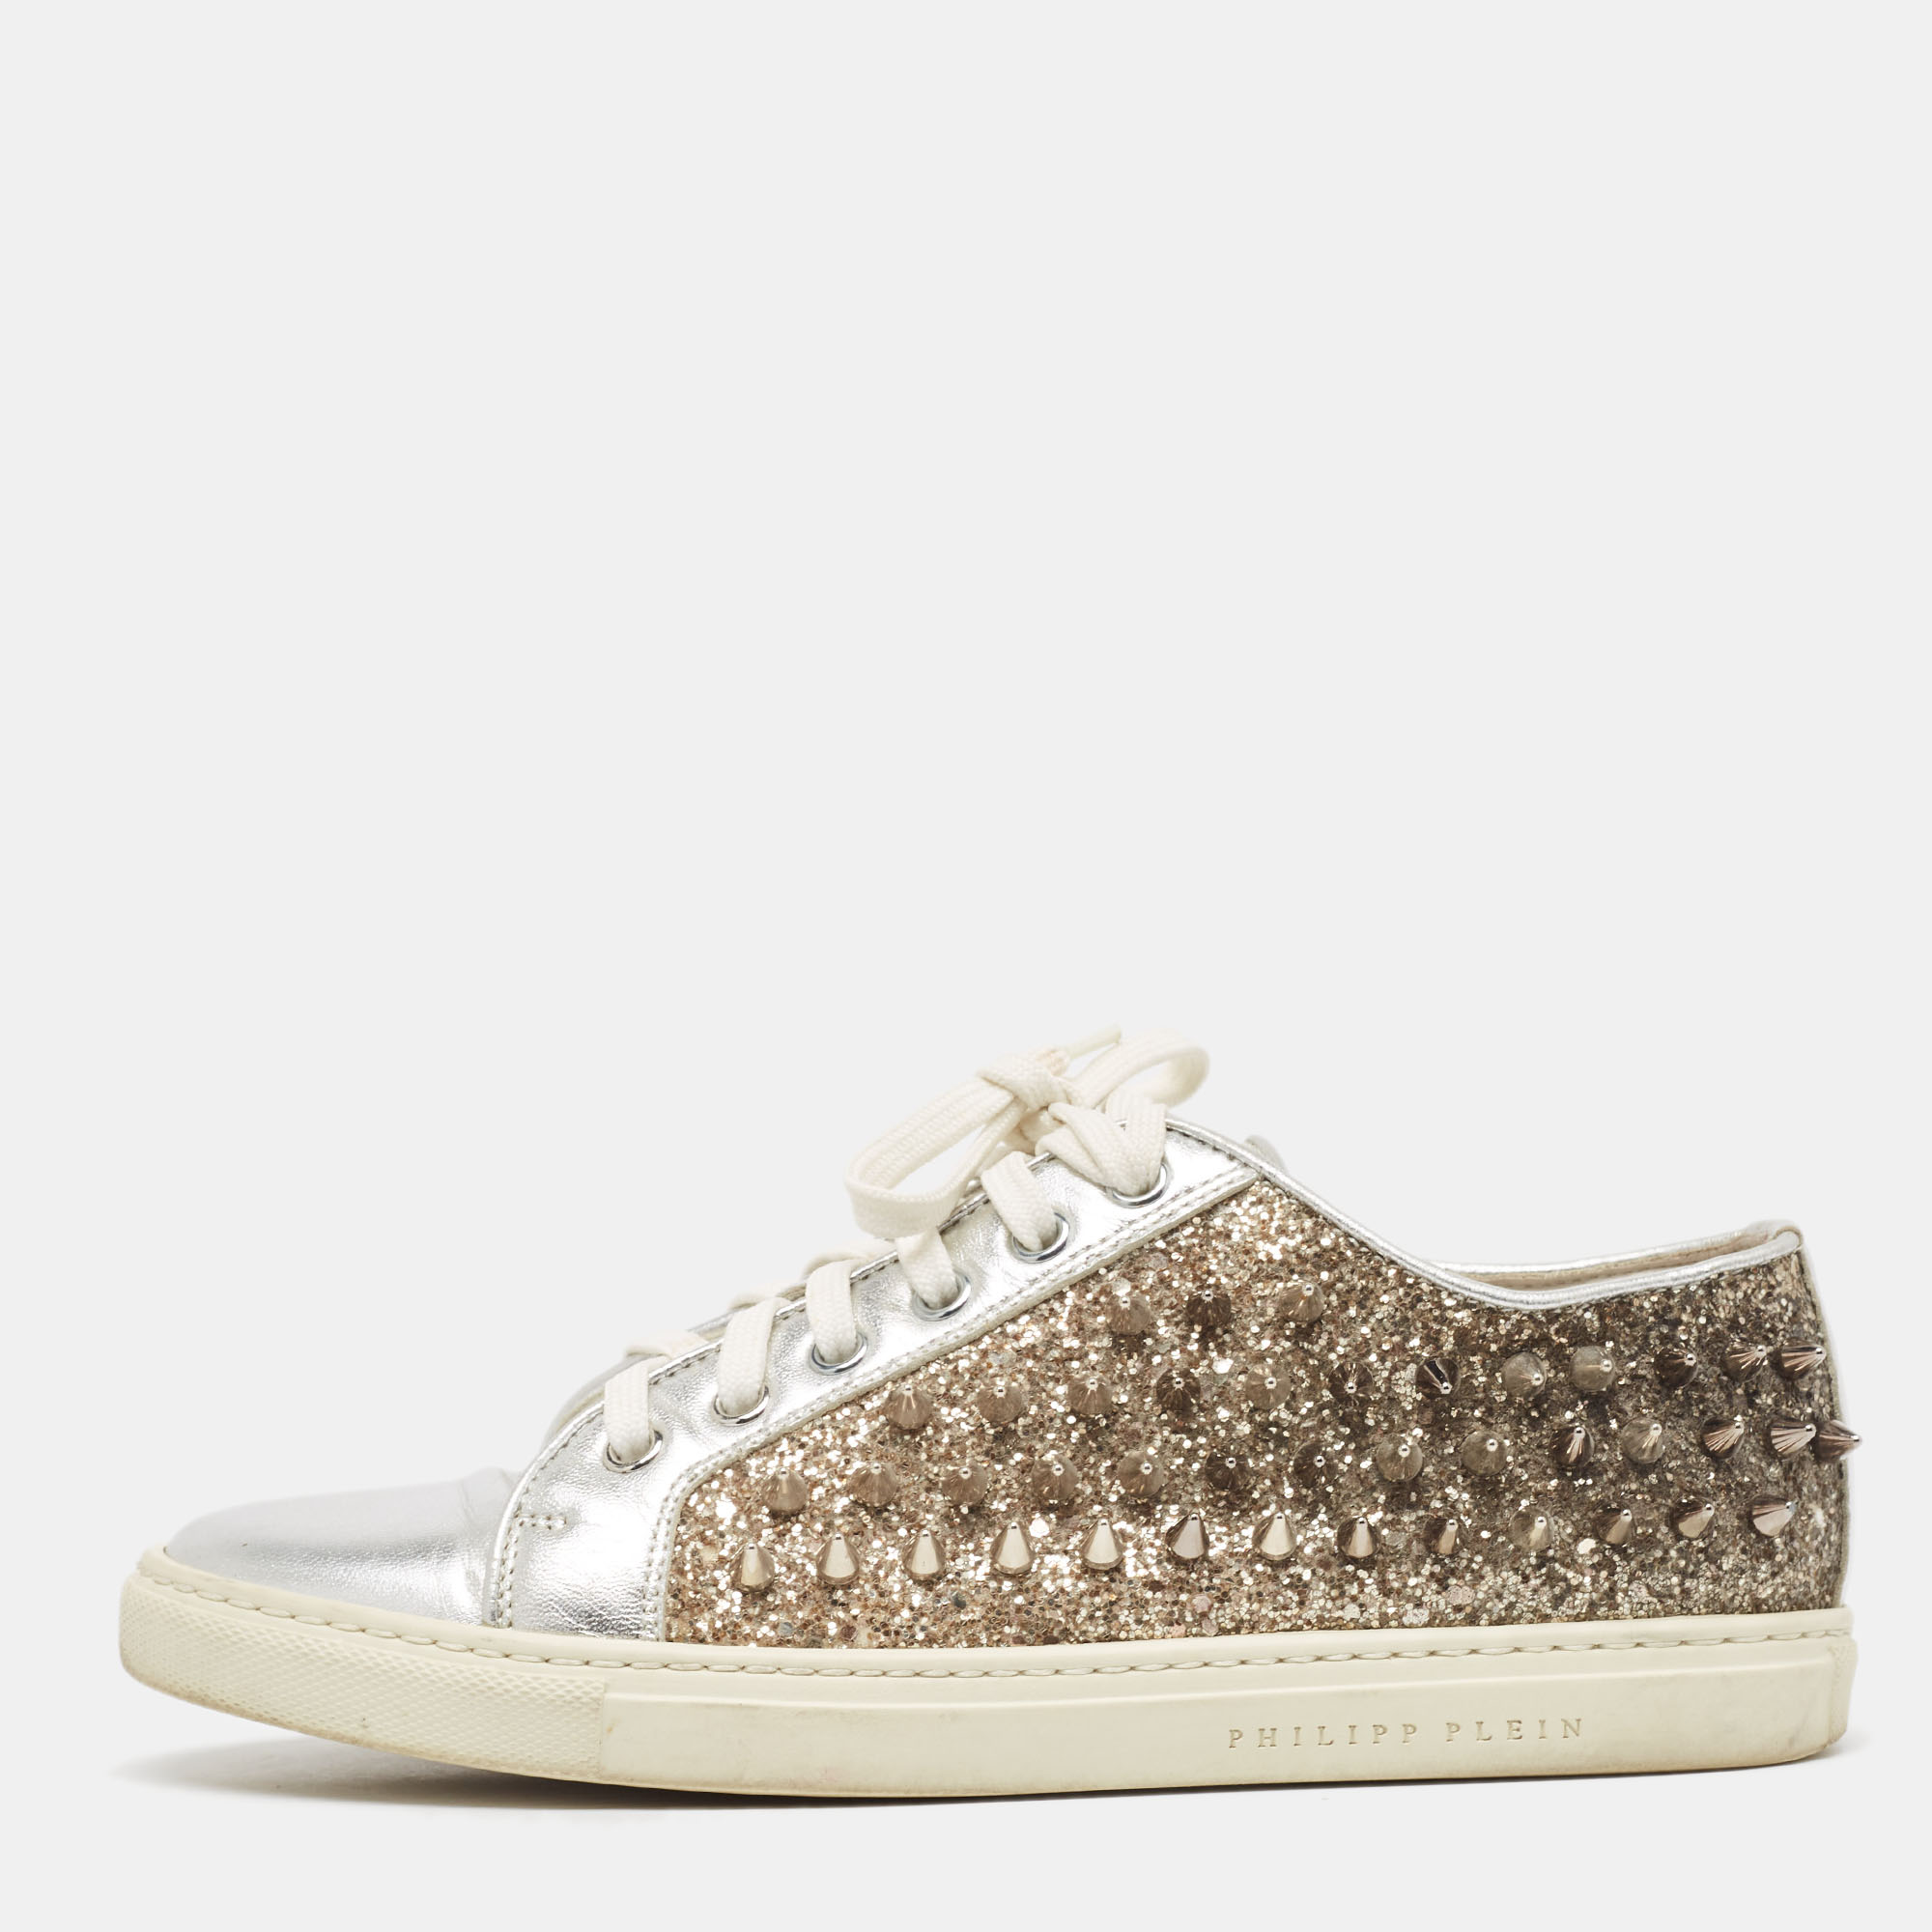 

Philipp Plein Silver/Gold Leather And Glitter Spike Sneakers Size